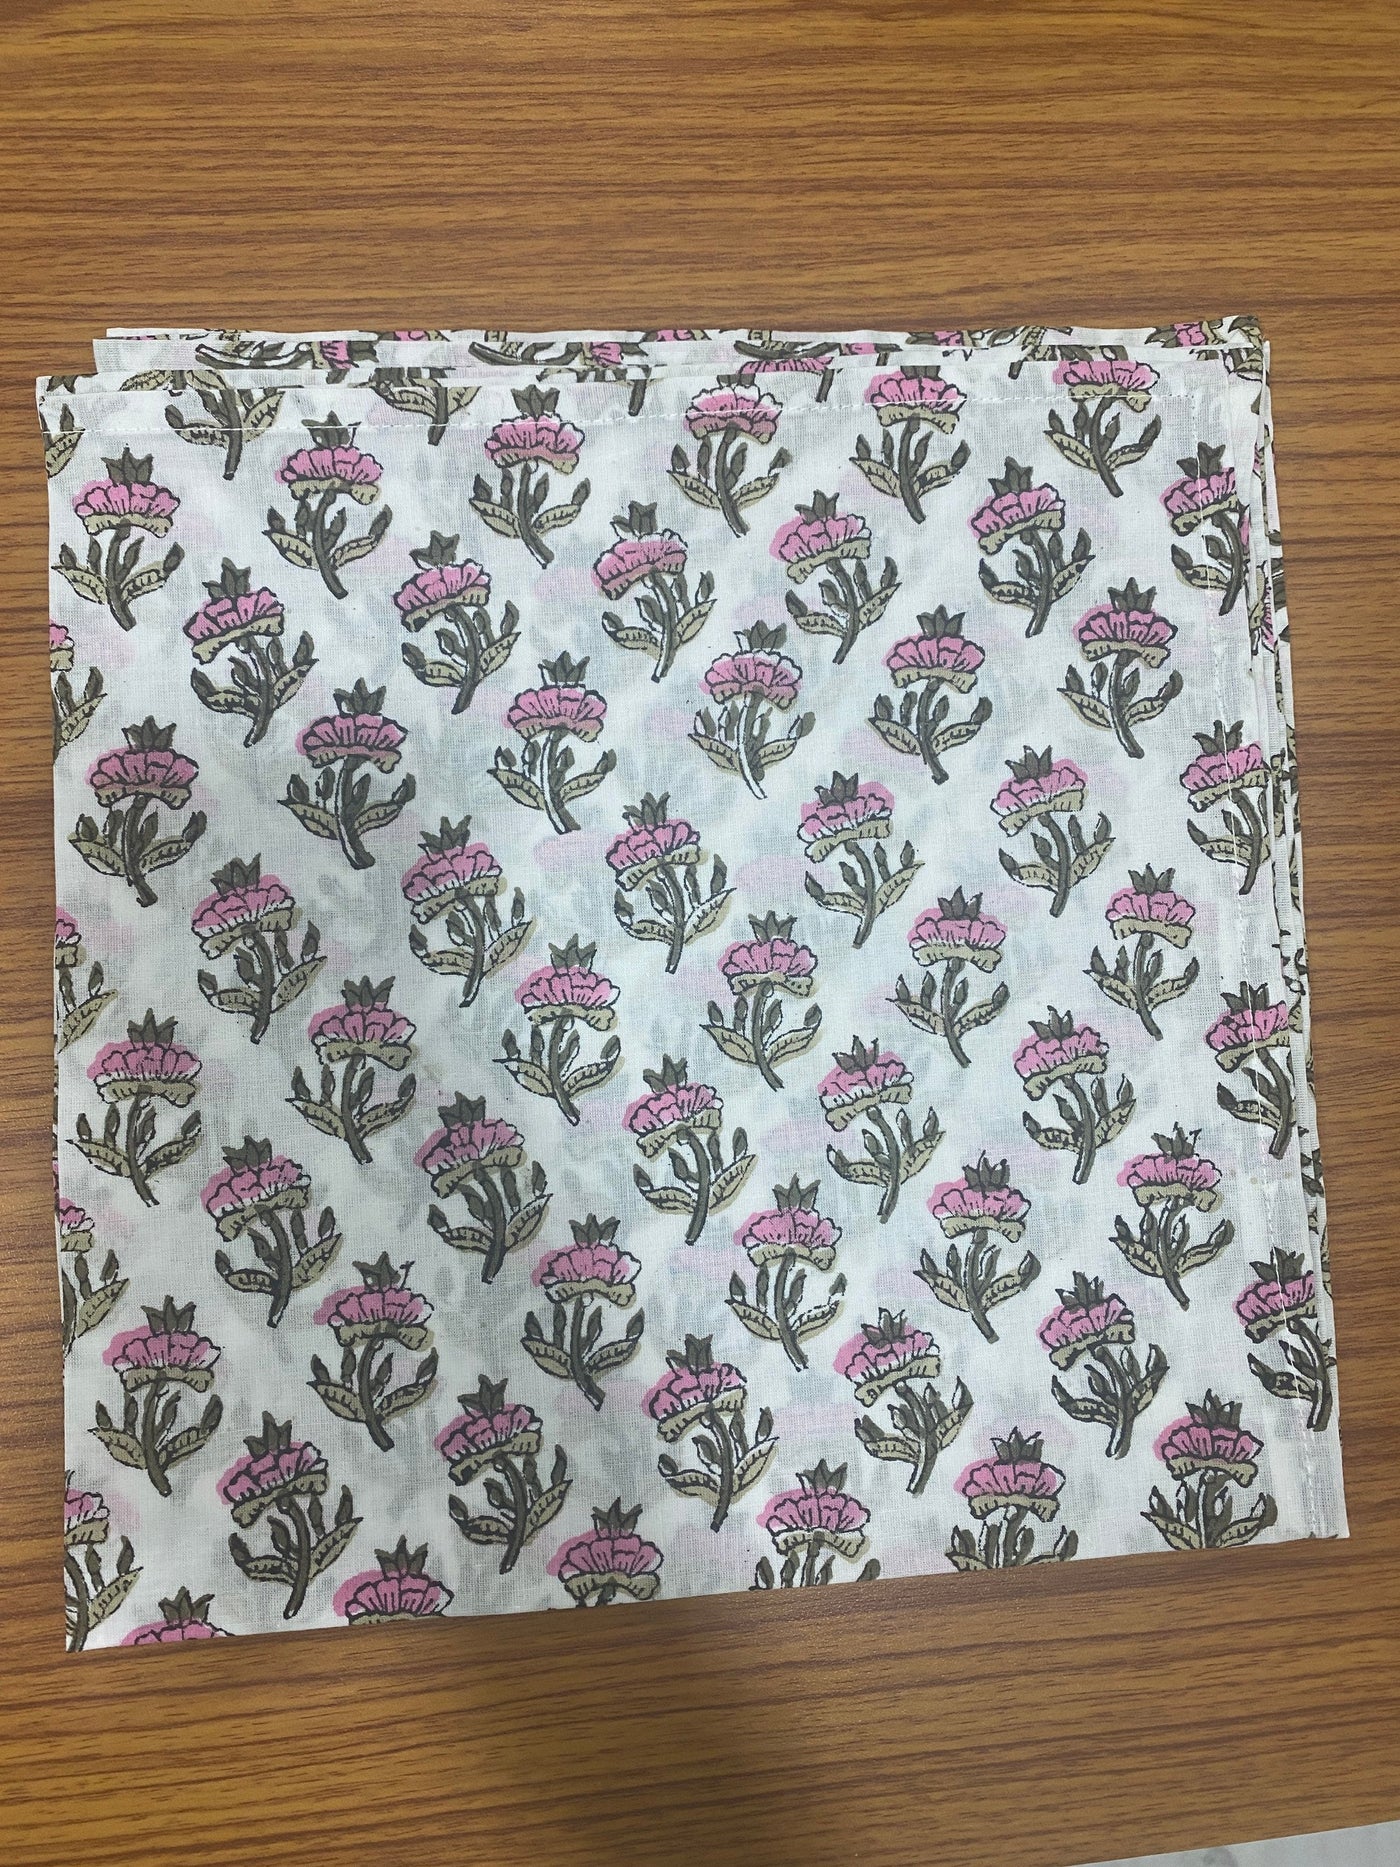 Fabricrush Taffy Pink, Asparagus and Army Green Indian Hand Block Floral Print Pure Cotton Cloth Napkins, 18x18"-Cocktail Napkins, 20x20"- Dinner Napkins